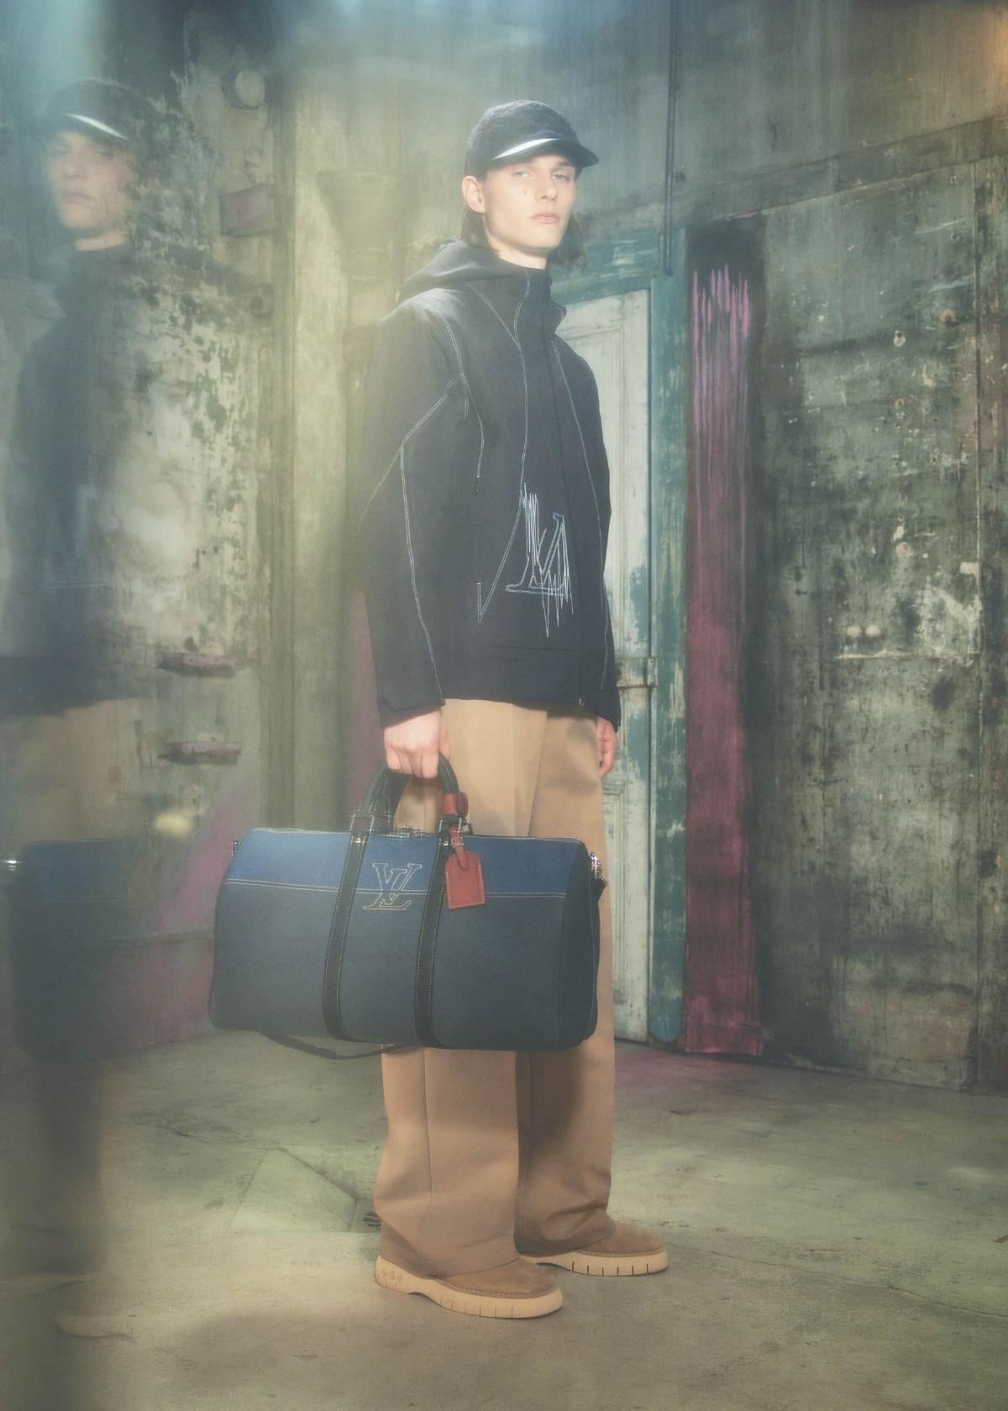 Louis Vuitton release David Mancuso The Loft party-inspired collection -  News - Mixmag